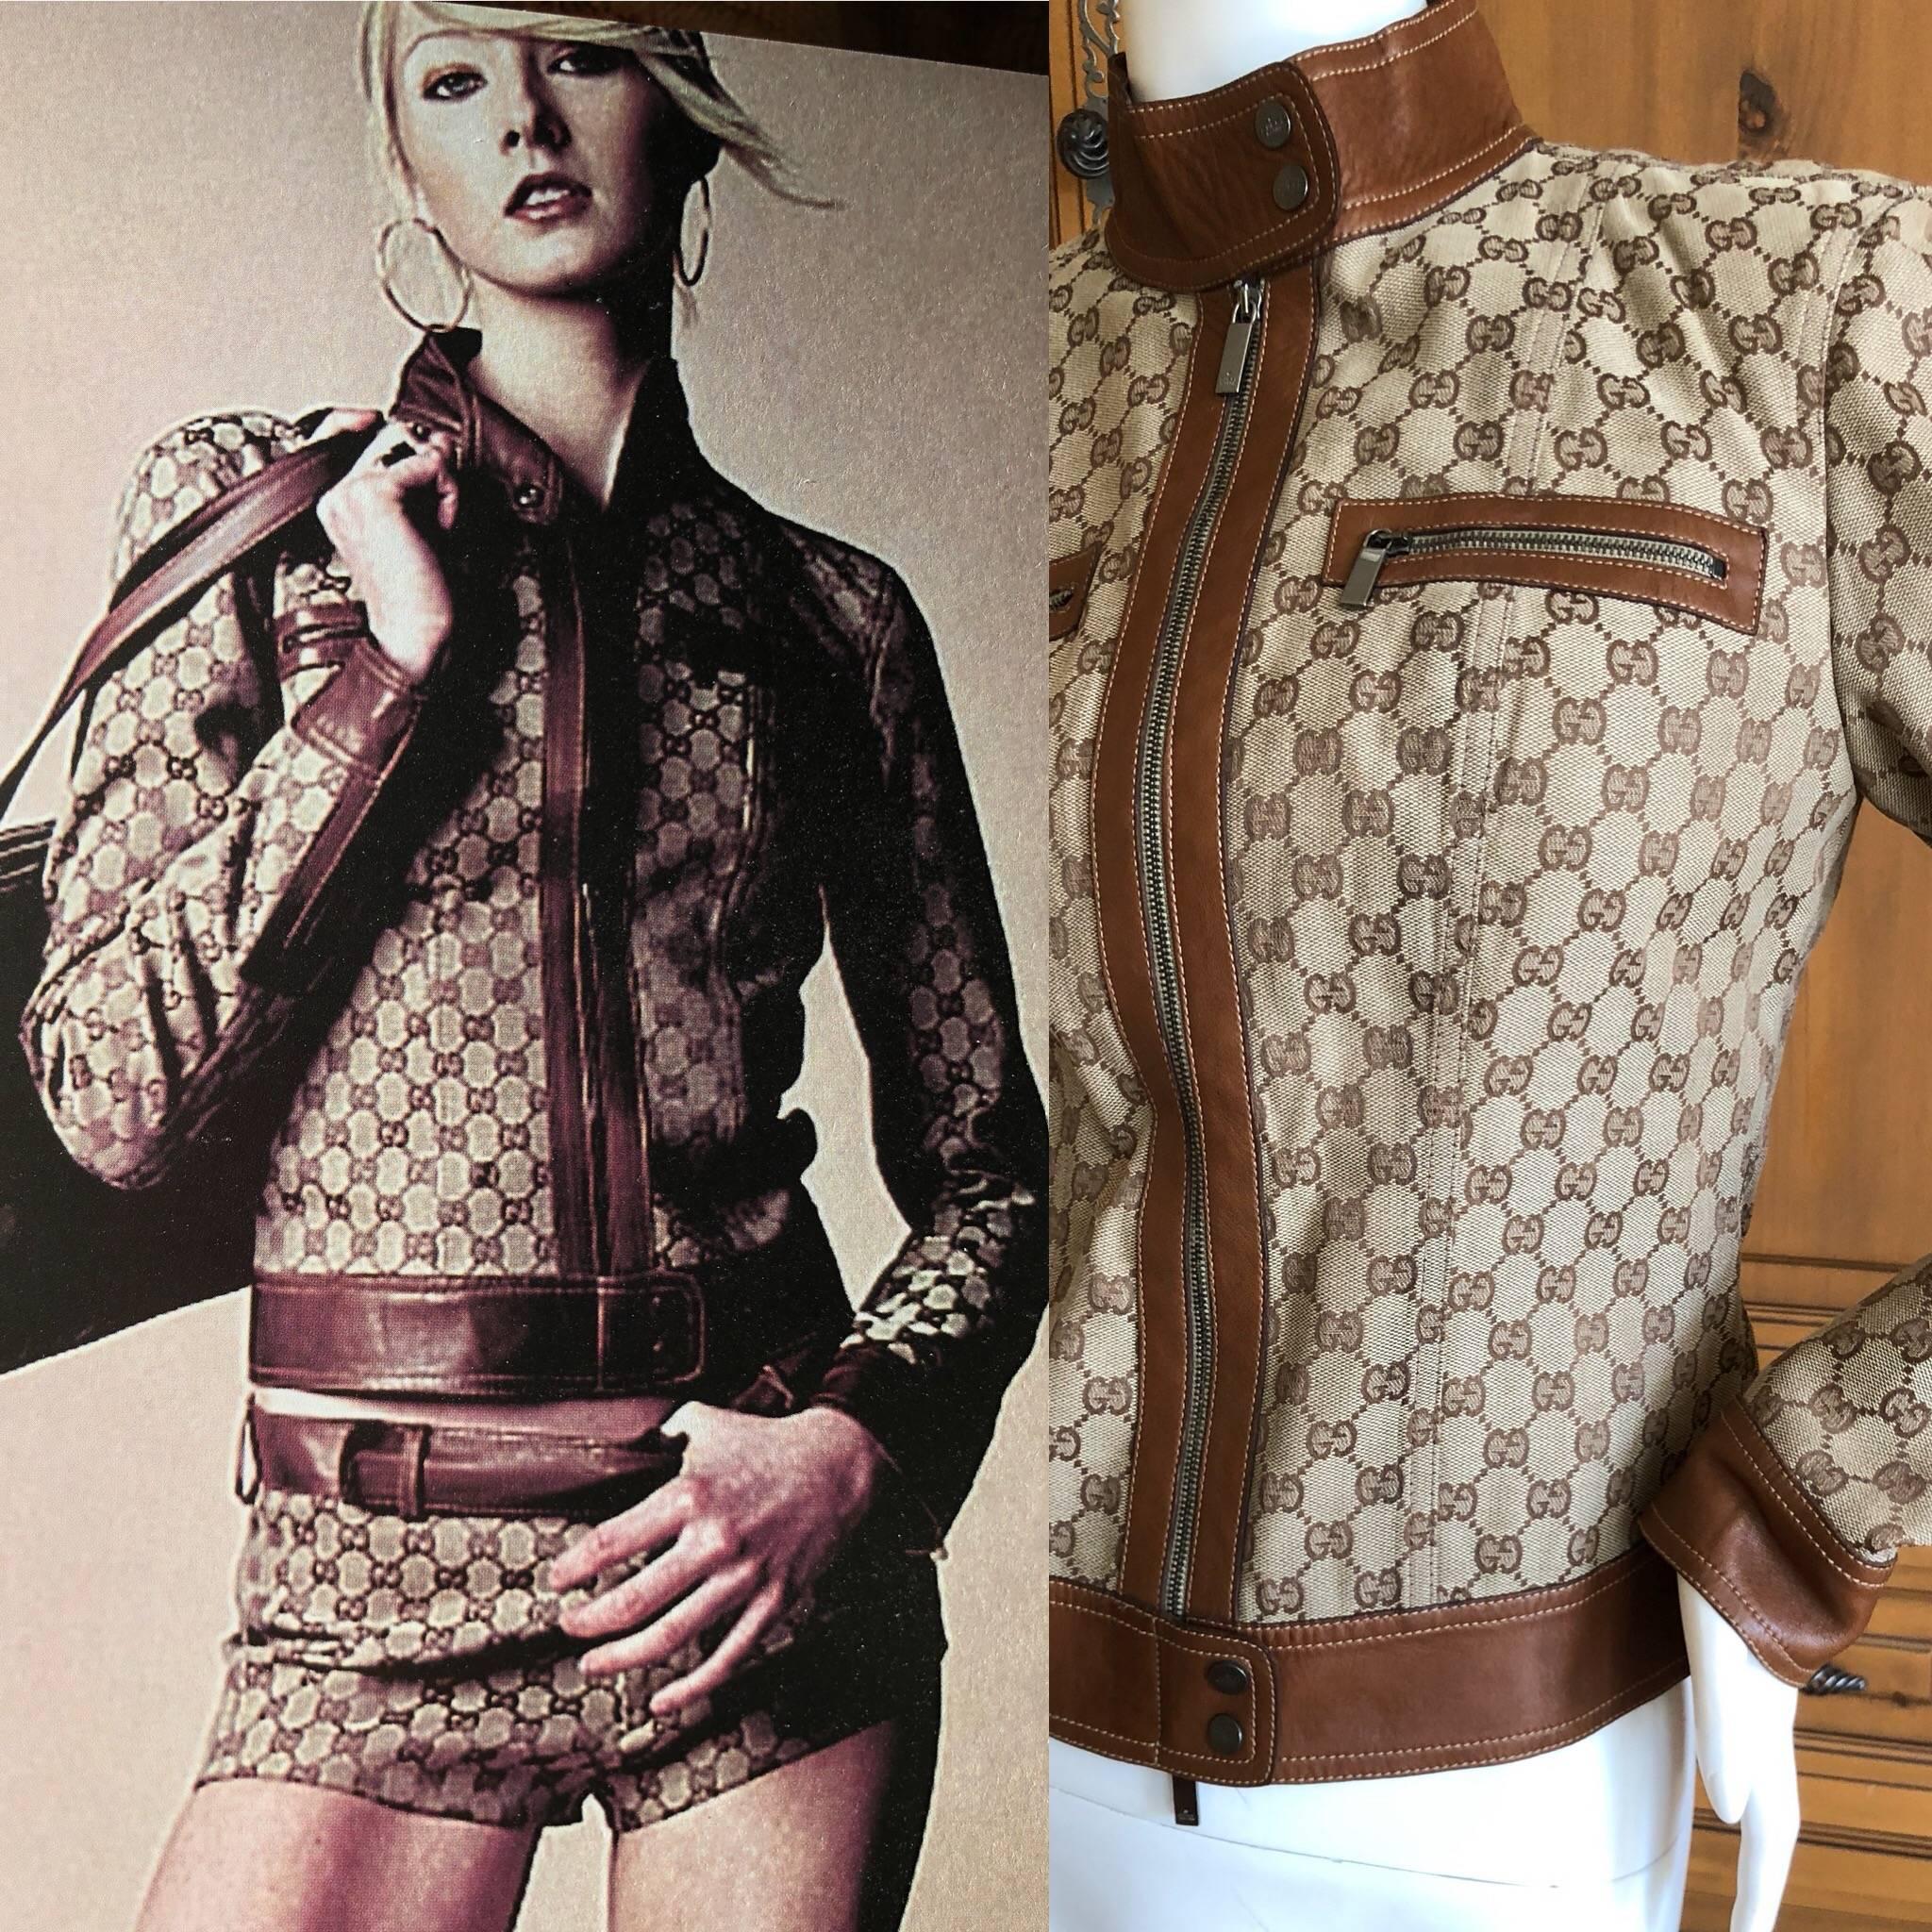 Gucci by Tom Ford Leather Monogram Jacket 2002 
As featured in the Tom Ford Book Full Page.
Leather interior, monogram GG Canvas outer.
Size 42
Bust 36